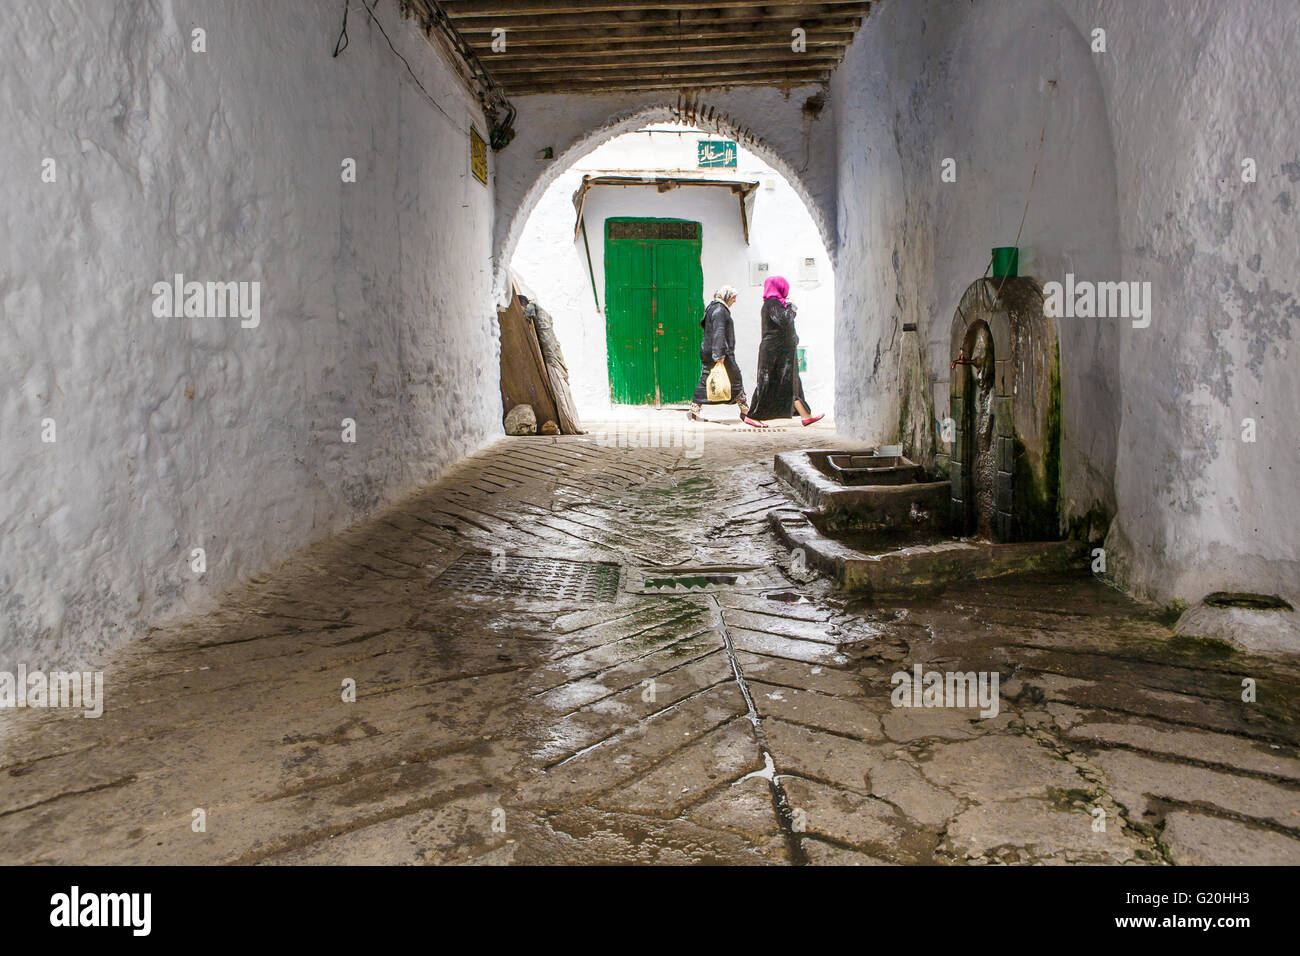 TETOUAN, MOROCCO - AUGUST 17: Unidentified arabic women walking by whitewashed streets of the medieval medina, on August 17, 201 Stock Photo